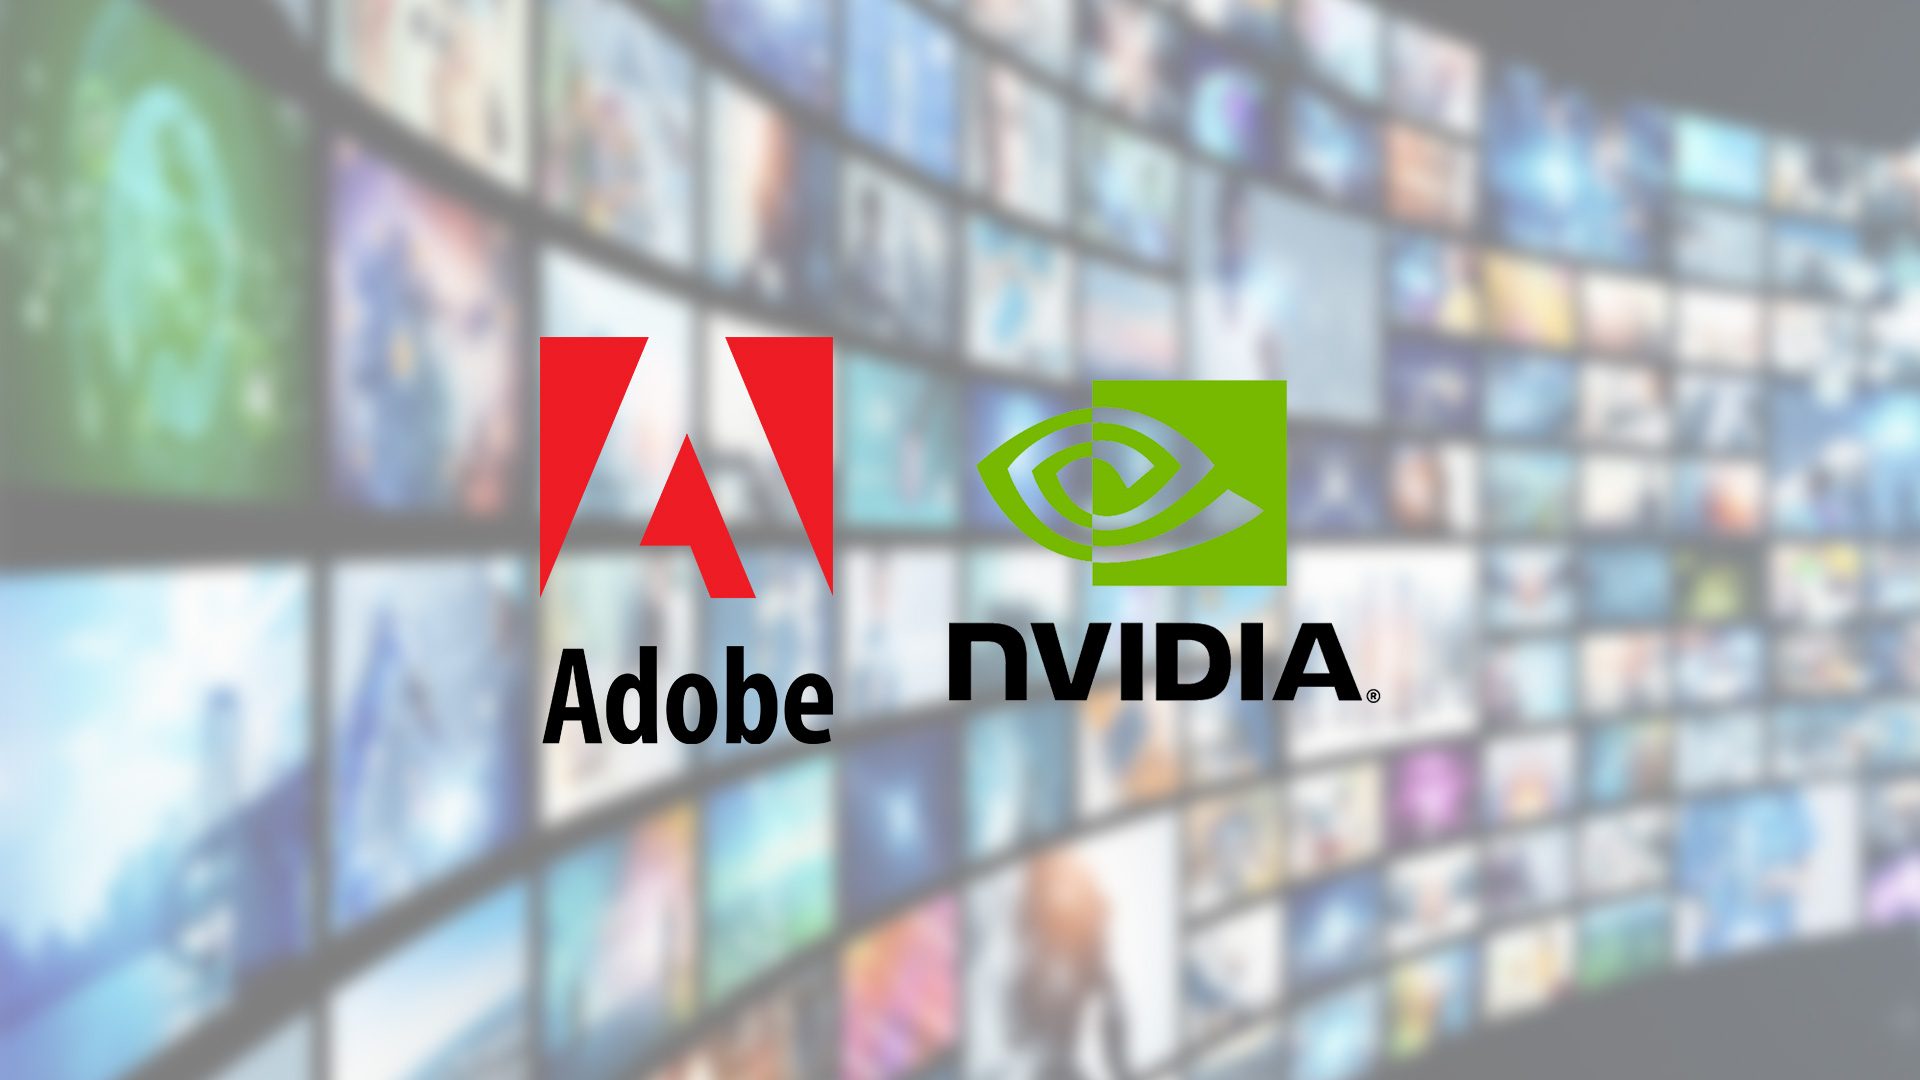 Adobe, Nvidia AI imagery systems aim to resolve copyright questions